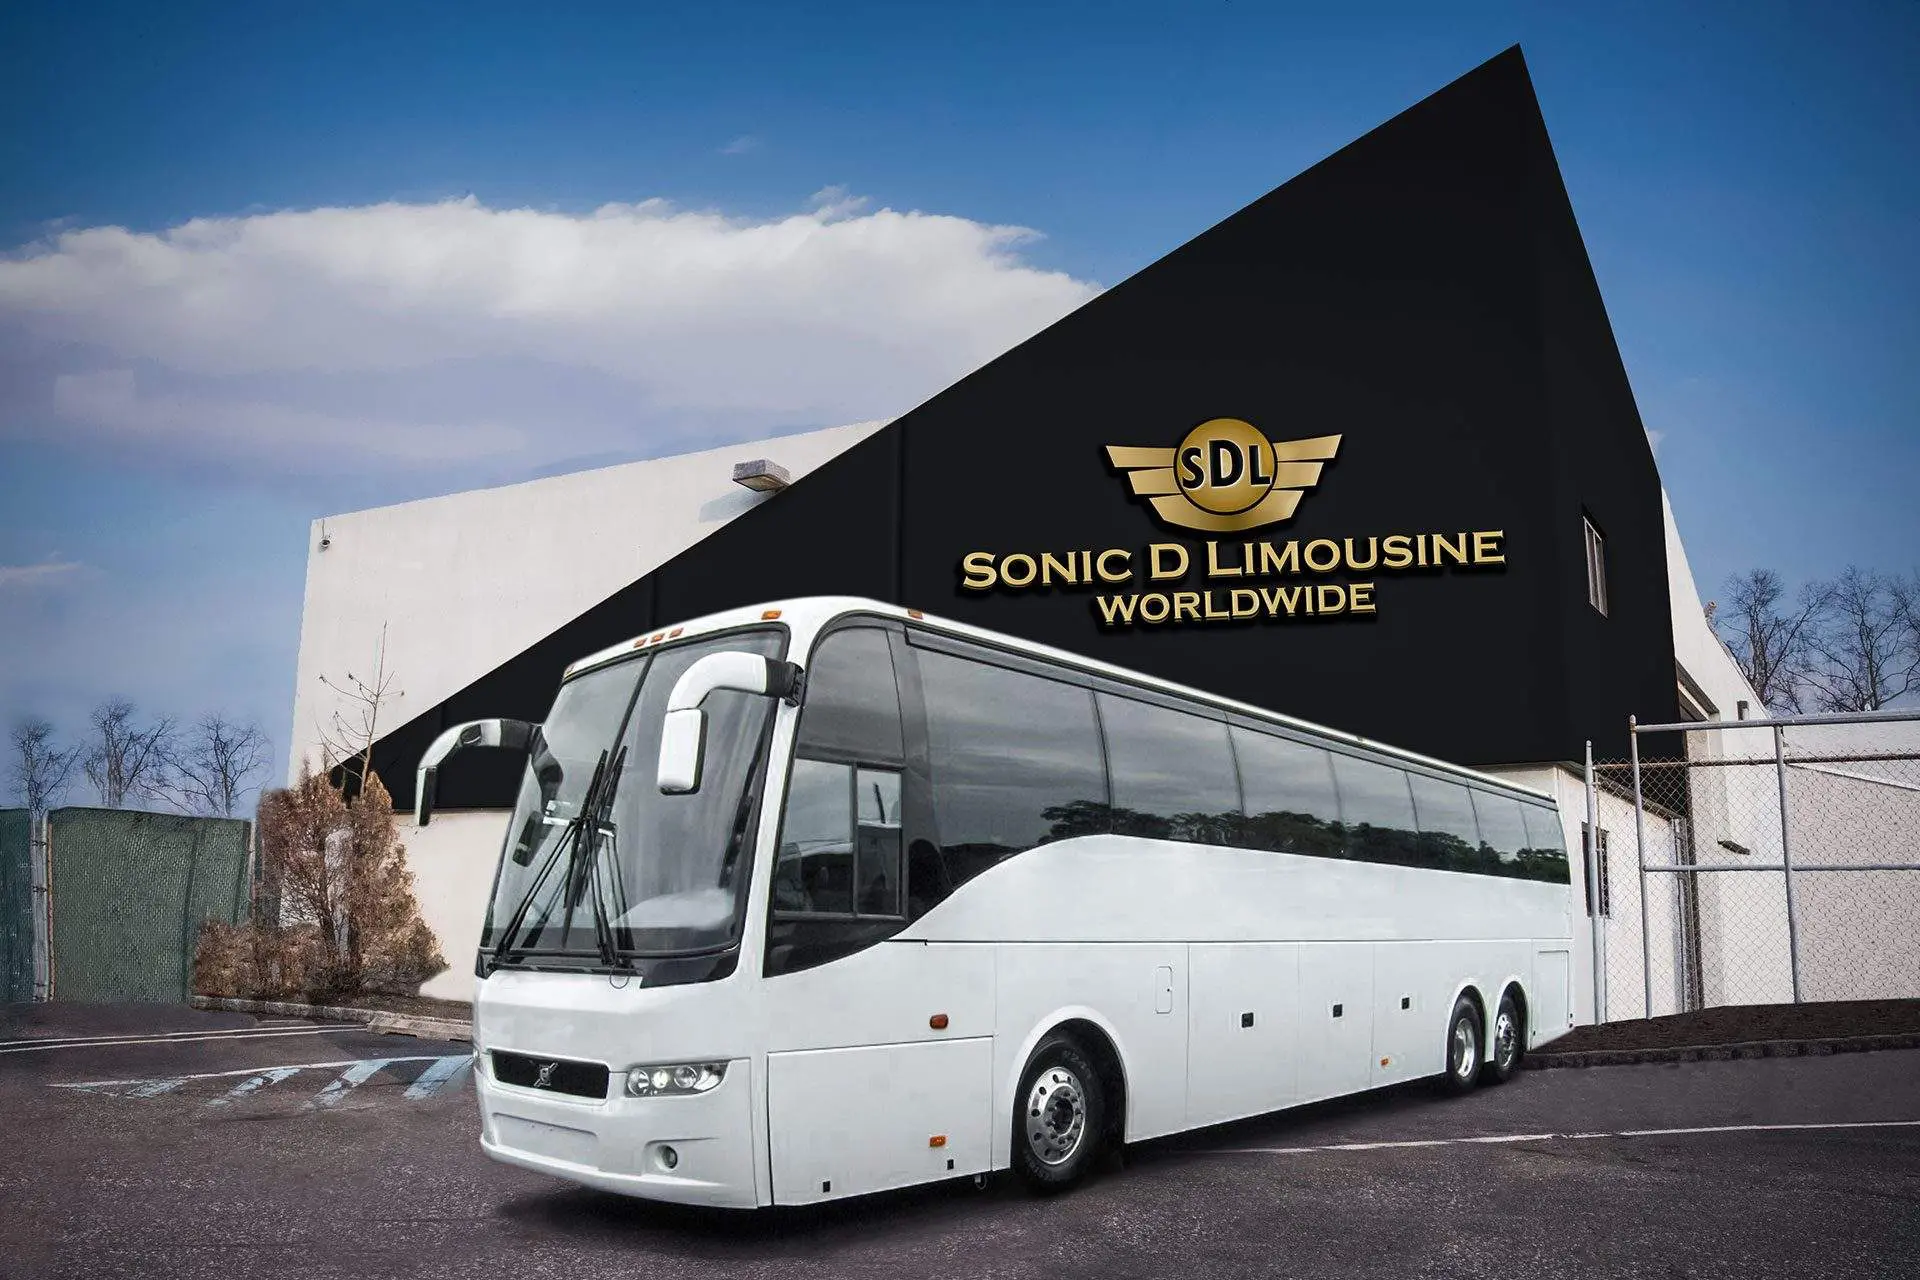 Sonic D Limousine logo in the background of a motor coach